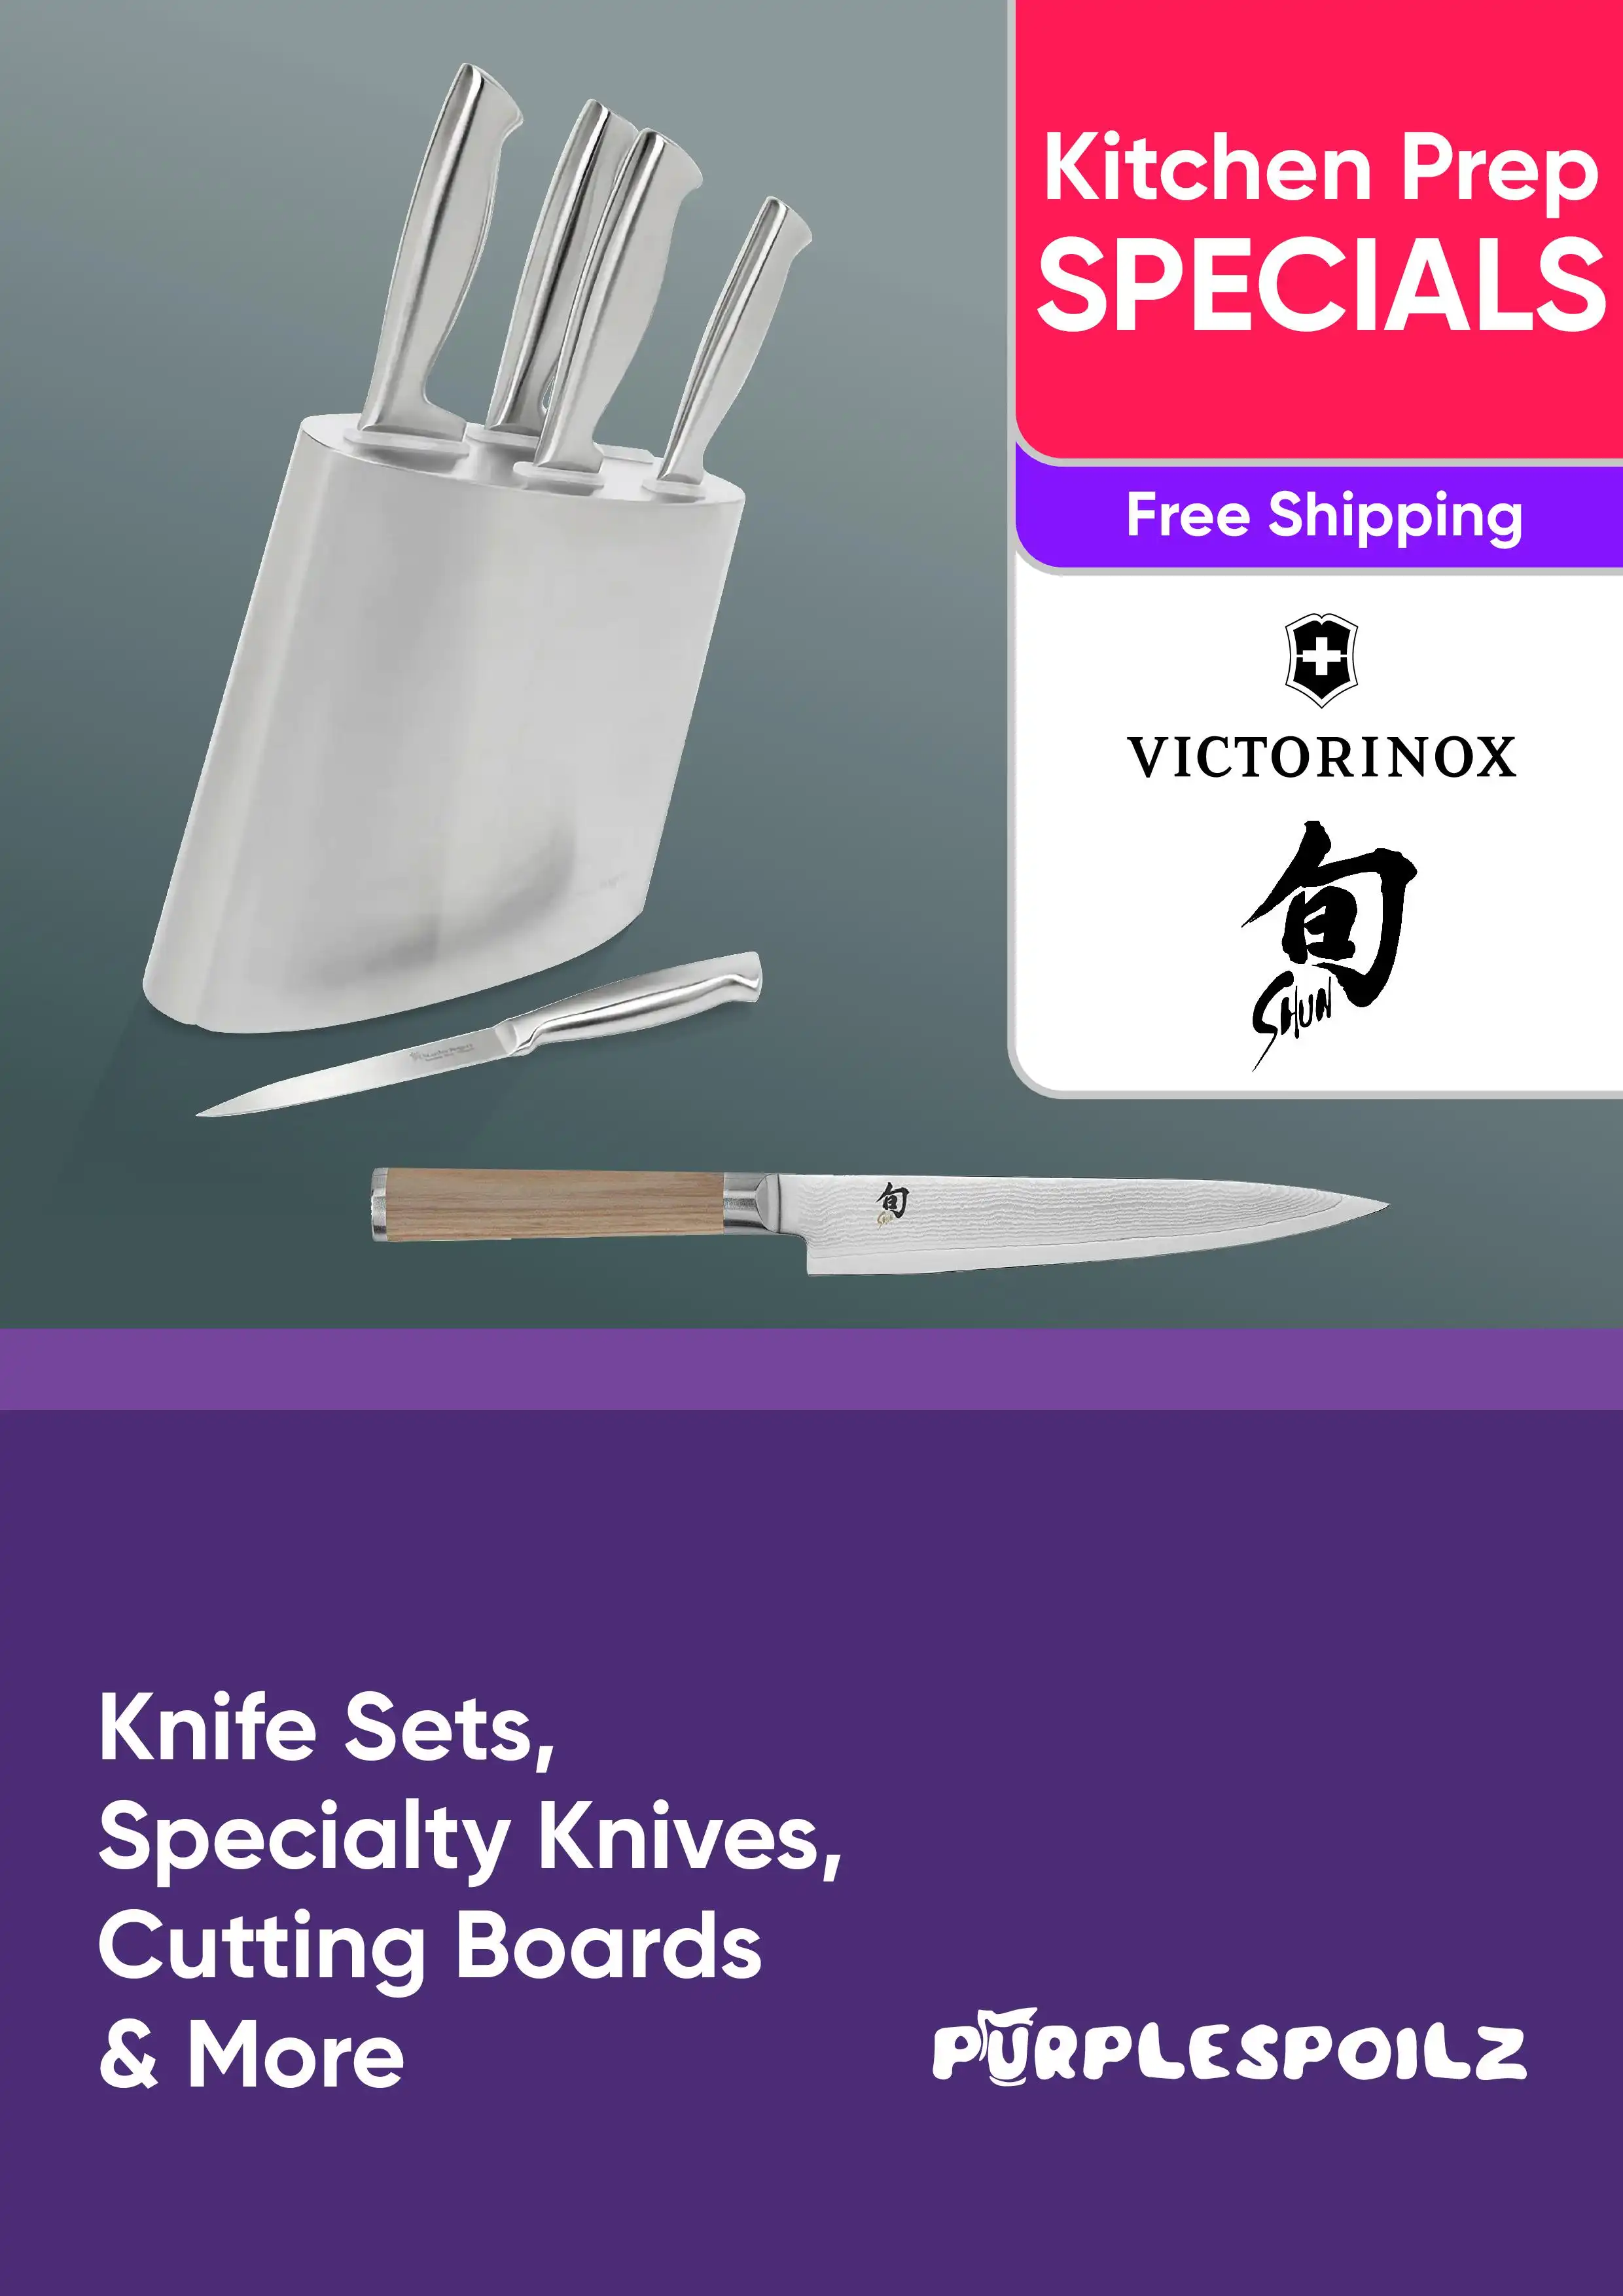 Knife Sets, Specialty Knives, Cutting Boards and Accessories - Free Shipping